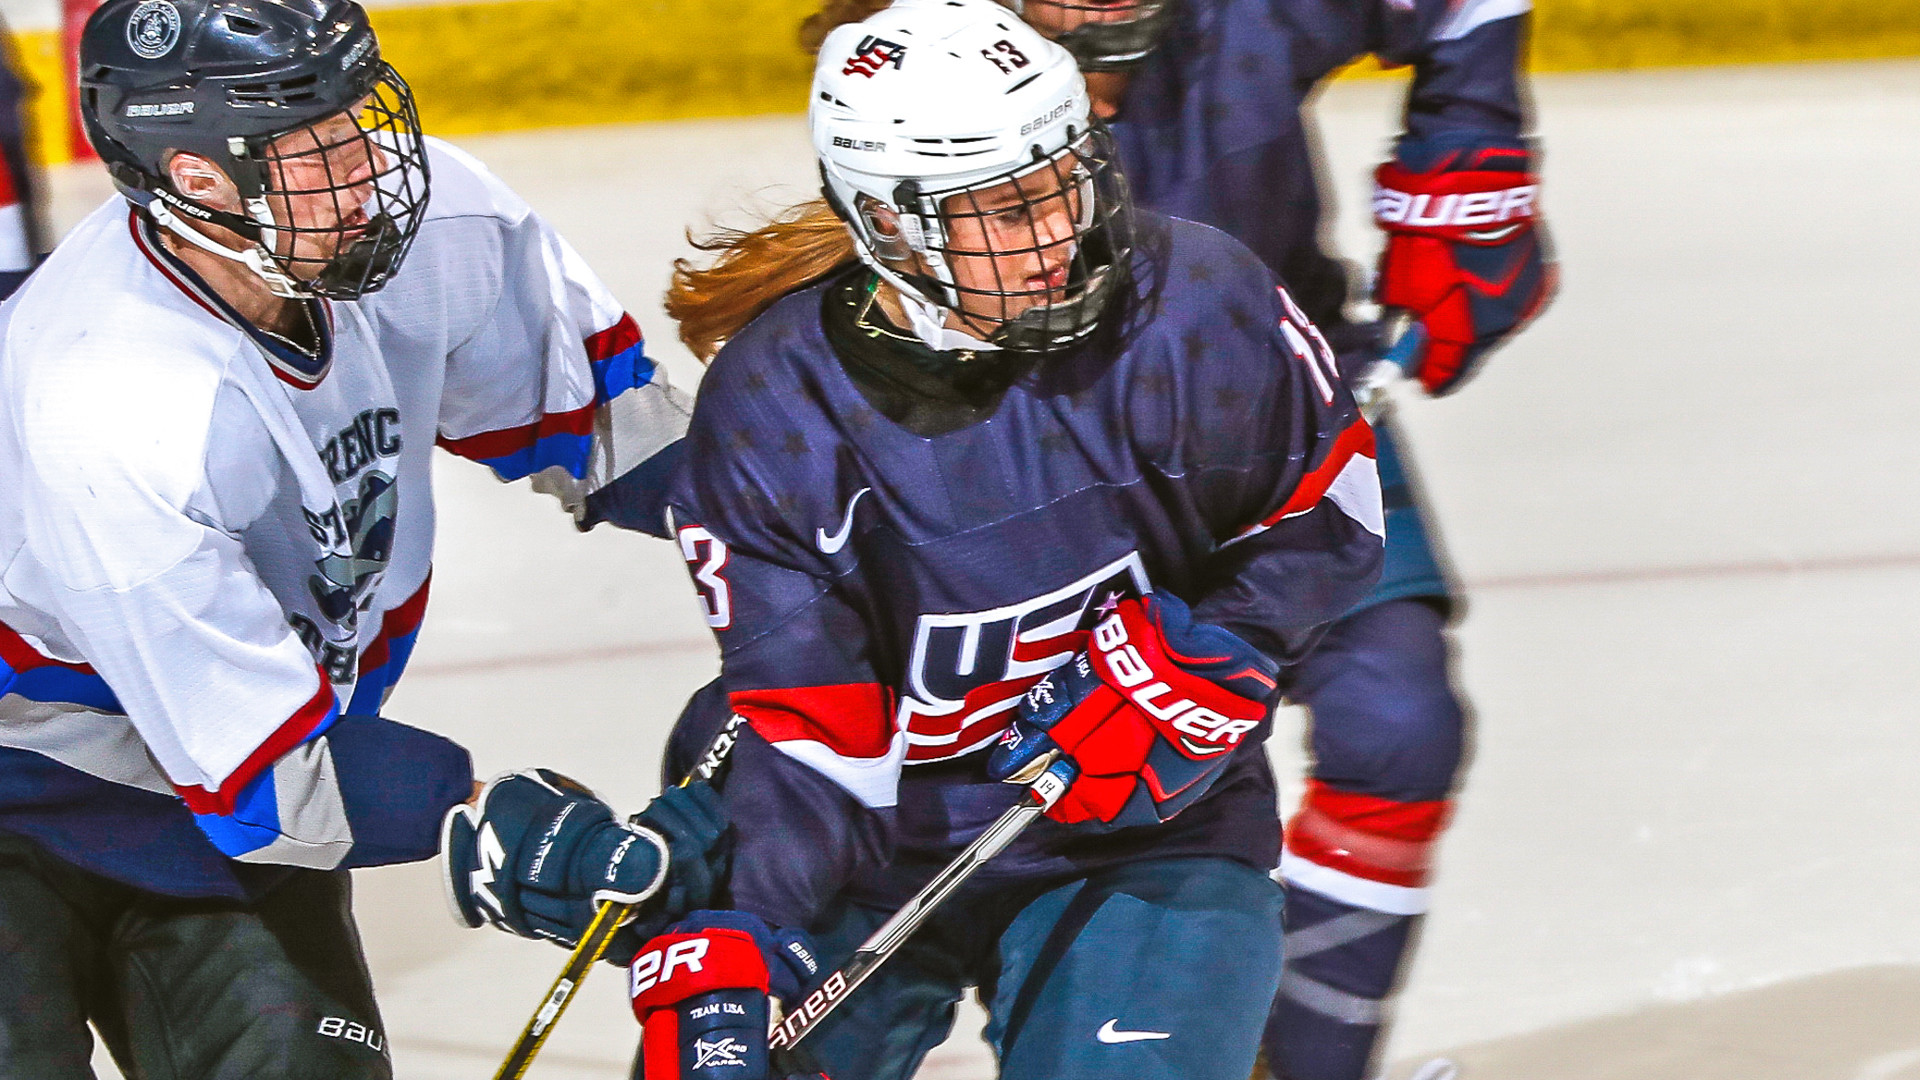 1920x1080 Compher Named to U.S. National Team for 2019 World Championship